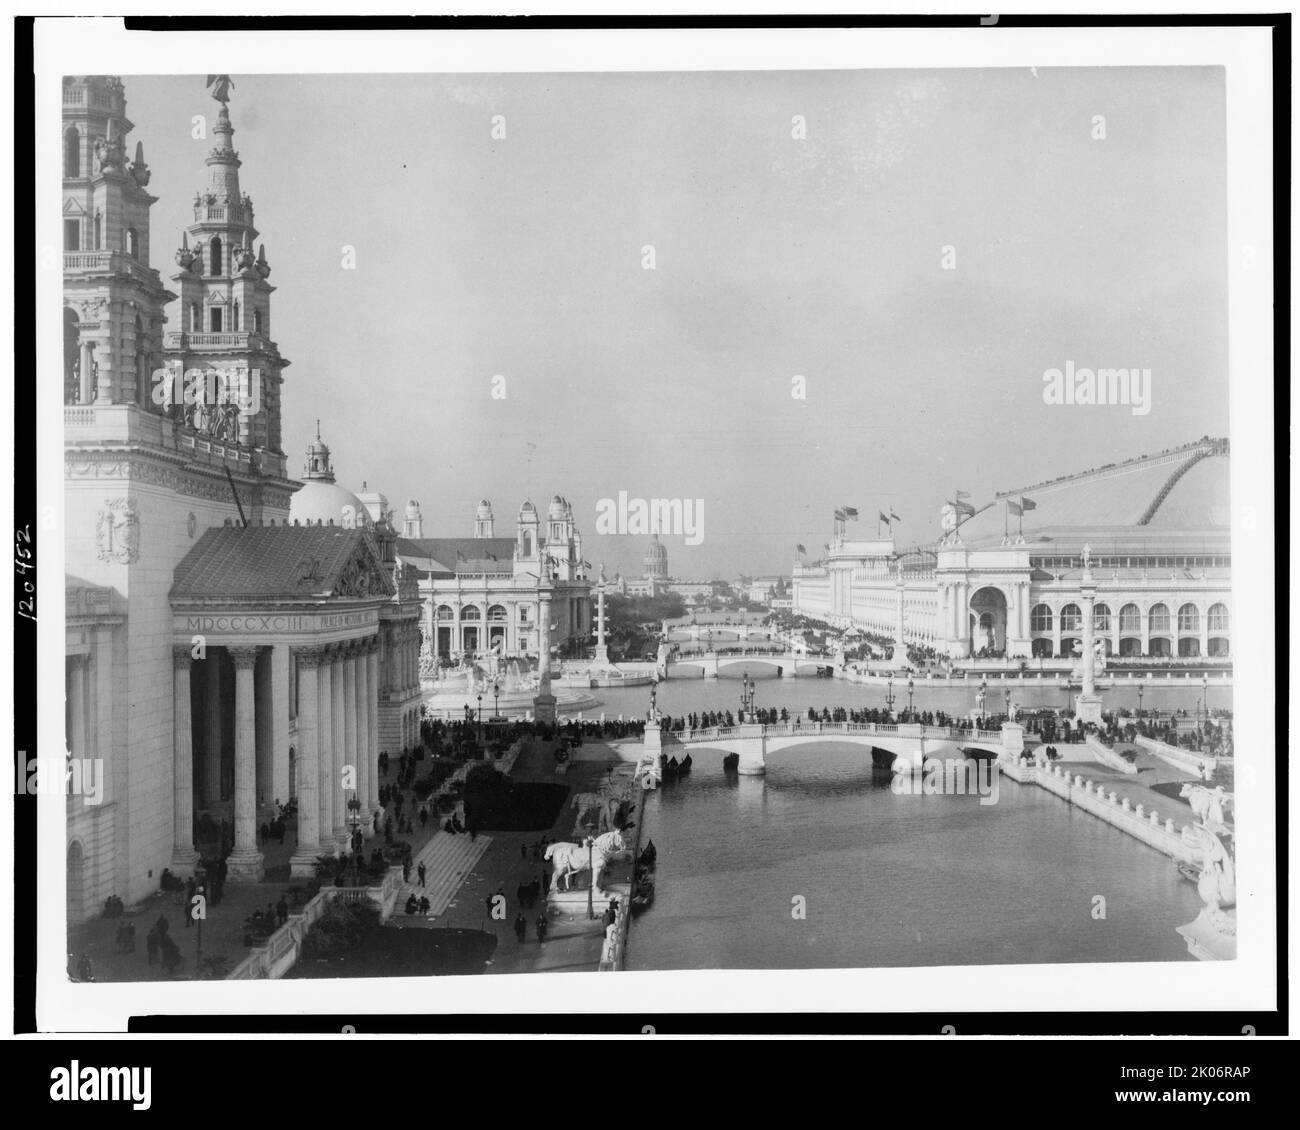 Bird's-eye view of exposition grounds, with canal in foreground, World's Columbian Exposition, Chicago, 1893. (Palace of Mechanic Arts and lagoon). Stock Photo